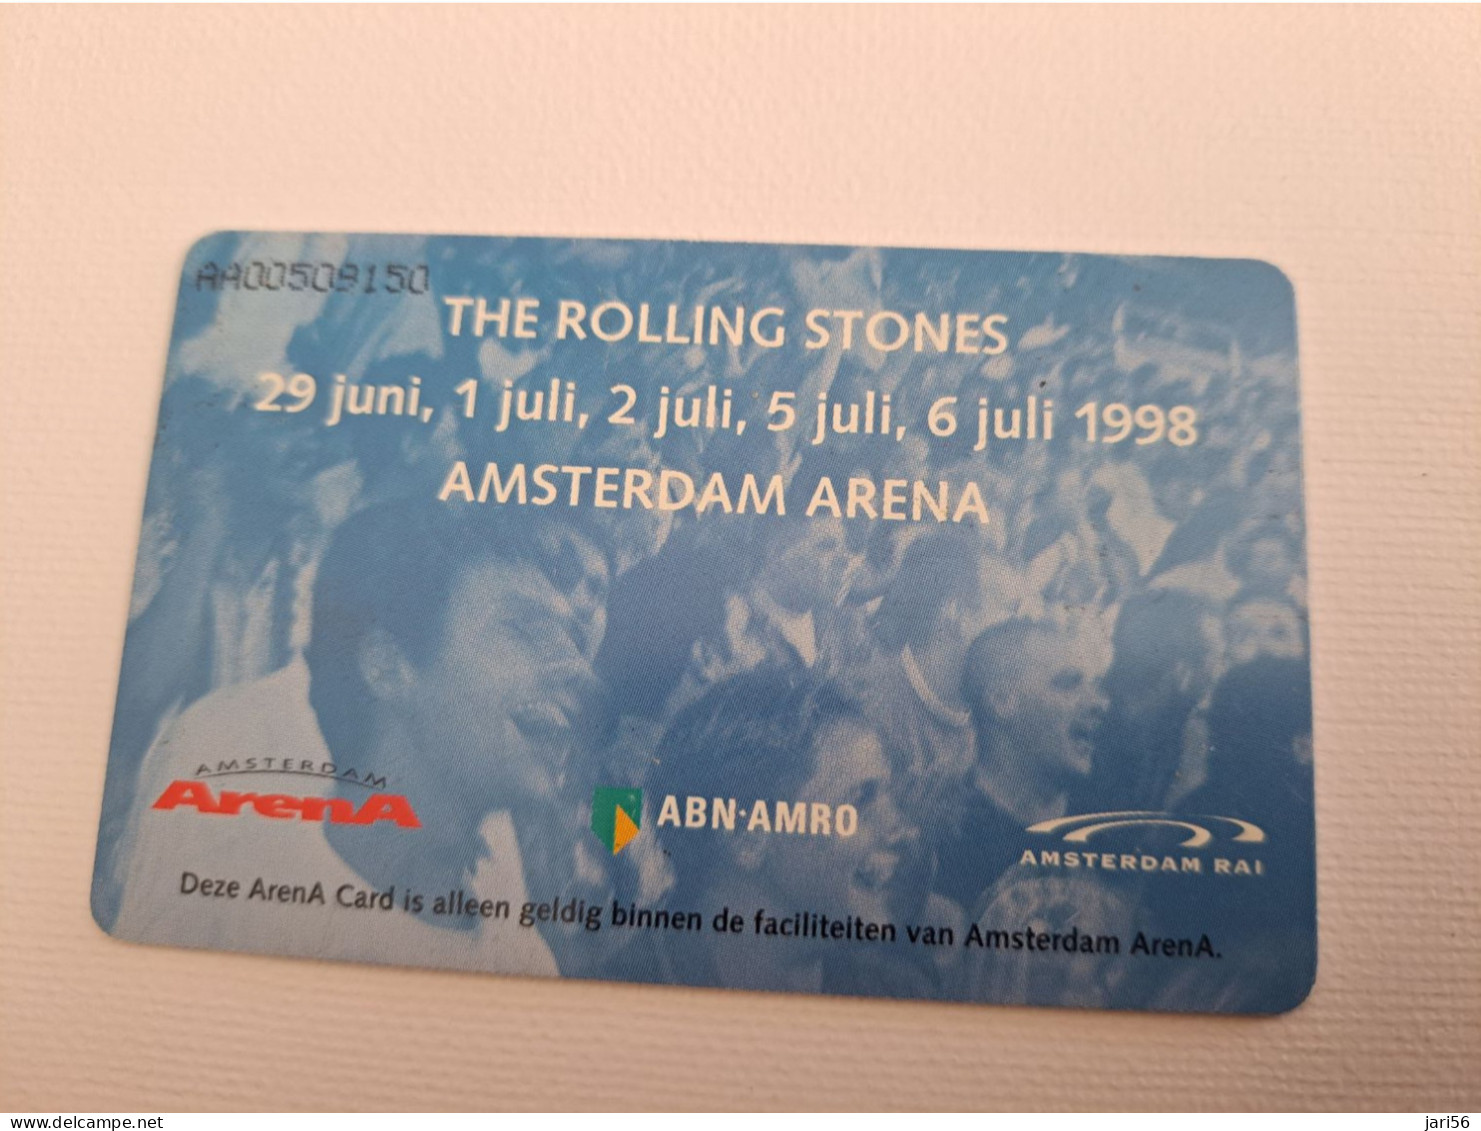 NETHERLANDS CHIPCARD / HFL 25,- ,- ARENA CARD /  ROLLING STONES  IN THE ARENA   - USED CARD  ** 13505** - öffentlich